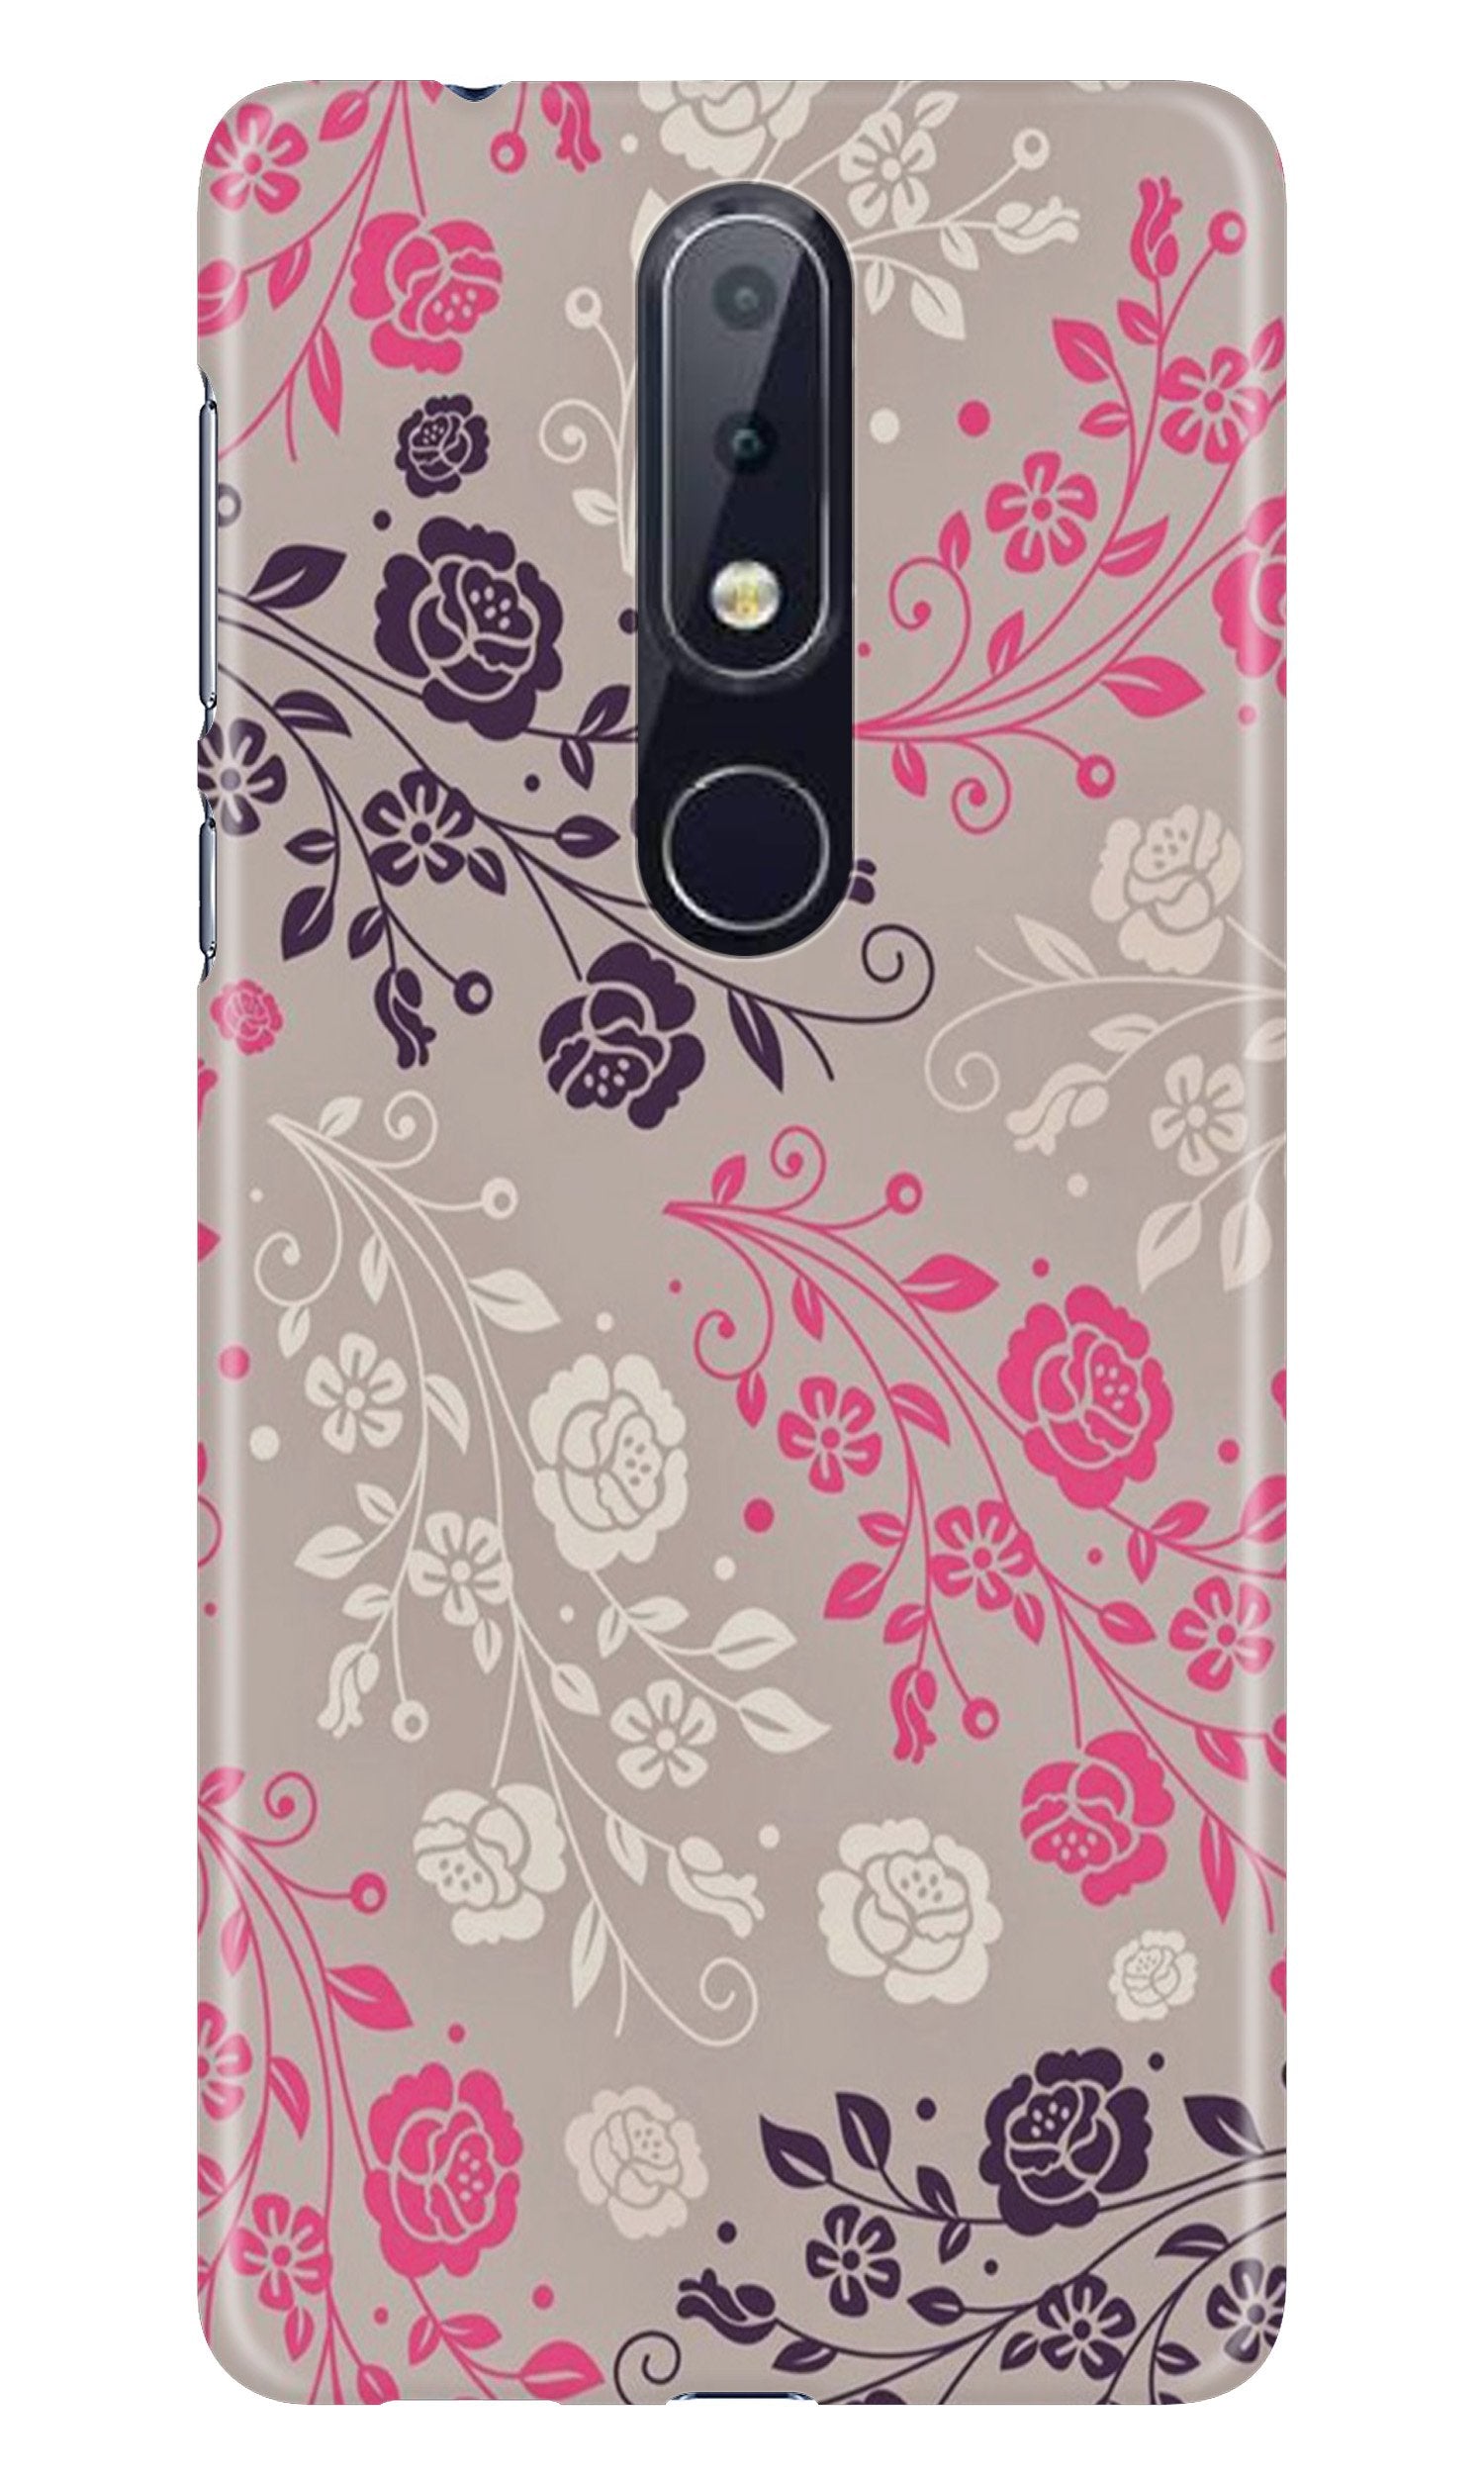 Pattern2 Case for Nokia 7.1